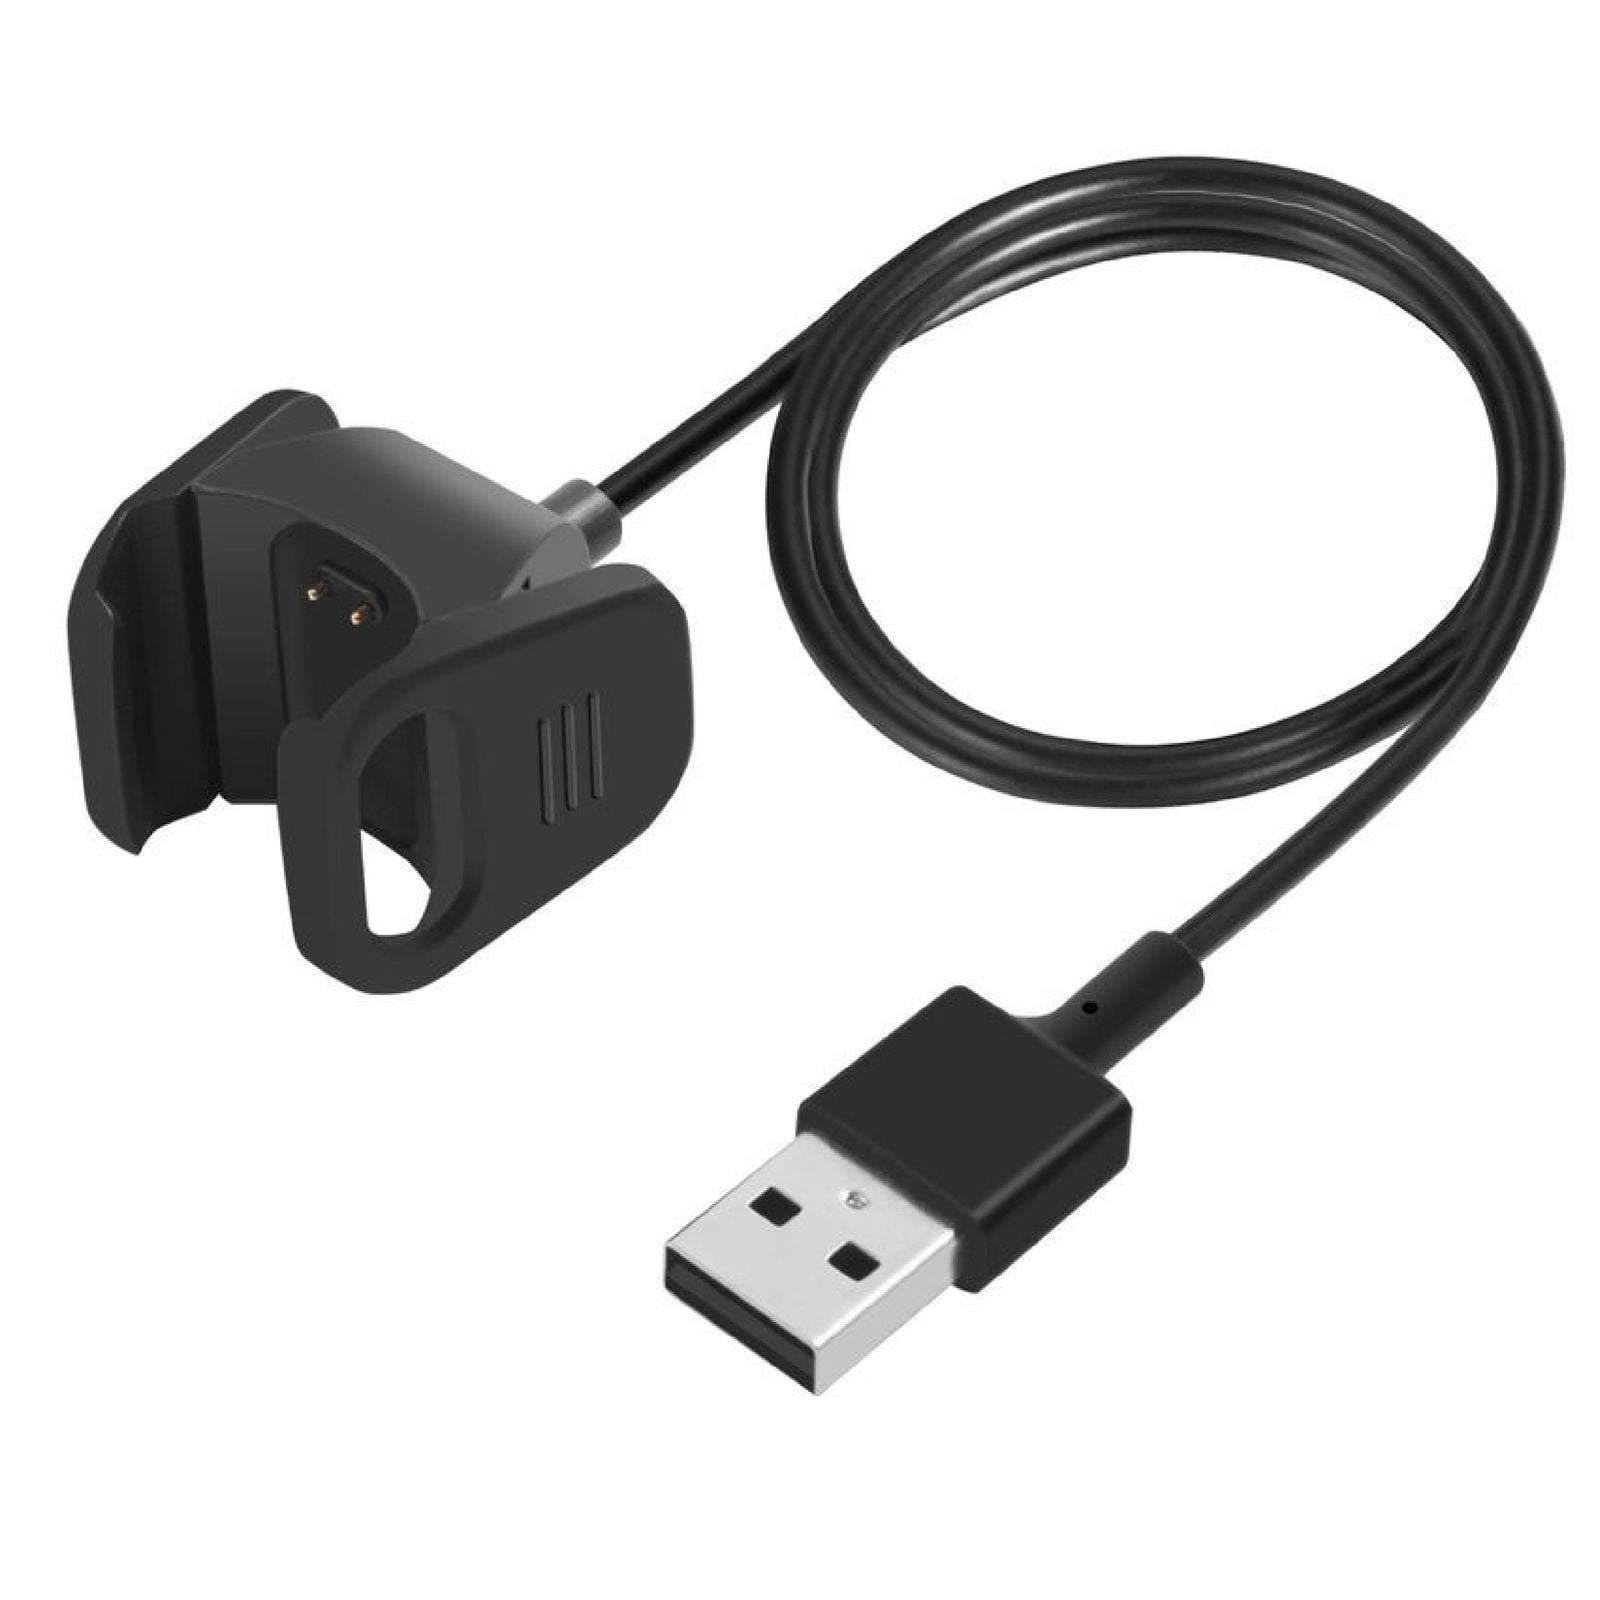 Details about   Genuine Charger For Fitbit Charge Activity Tracker Replacement Charging Cable 